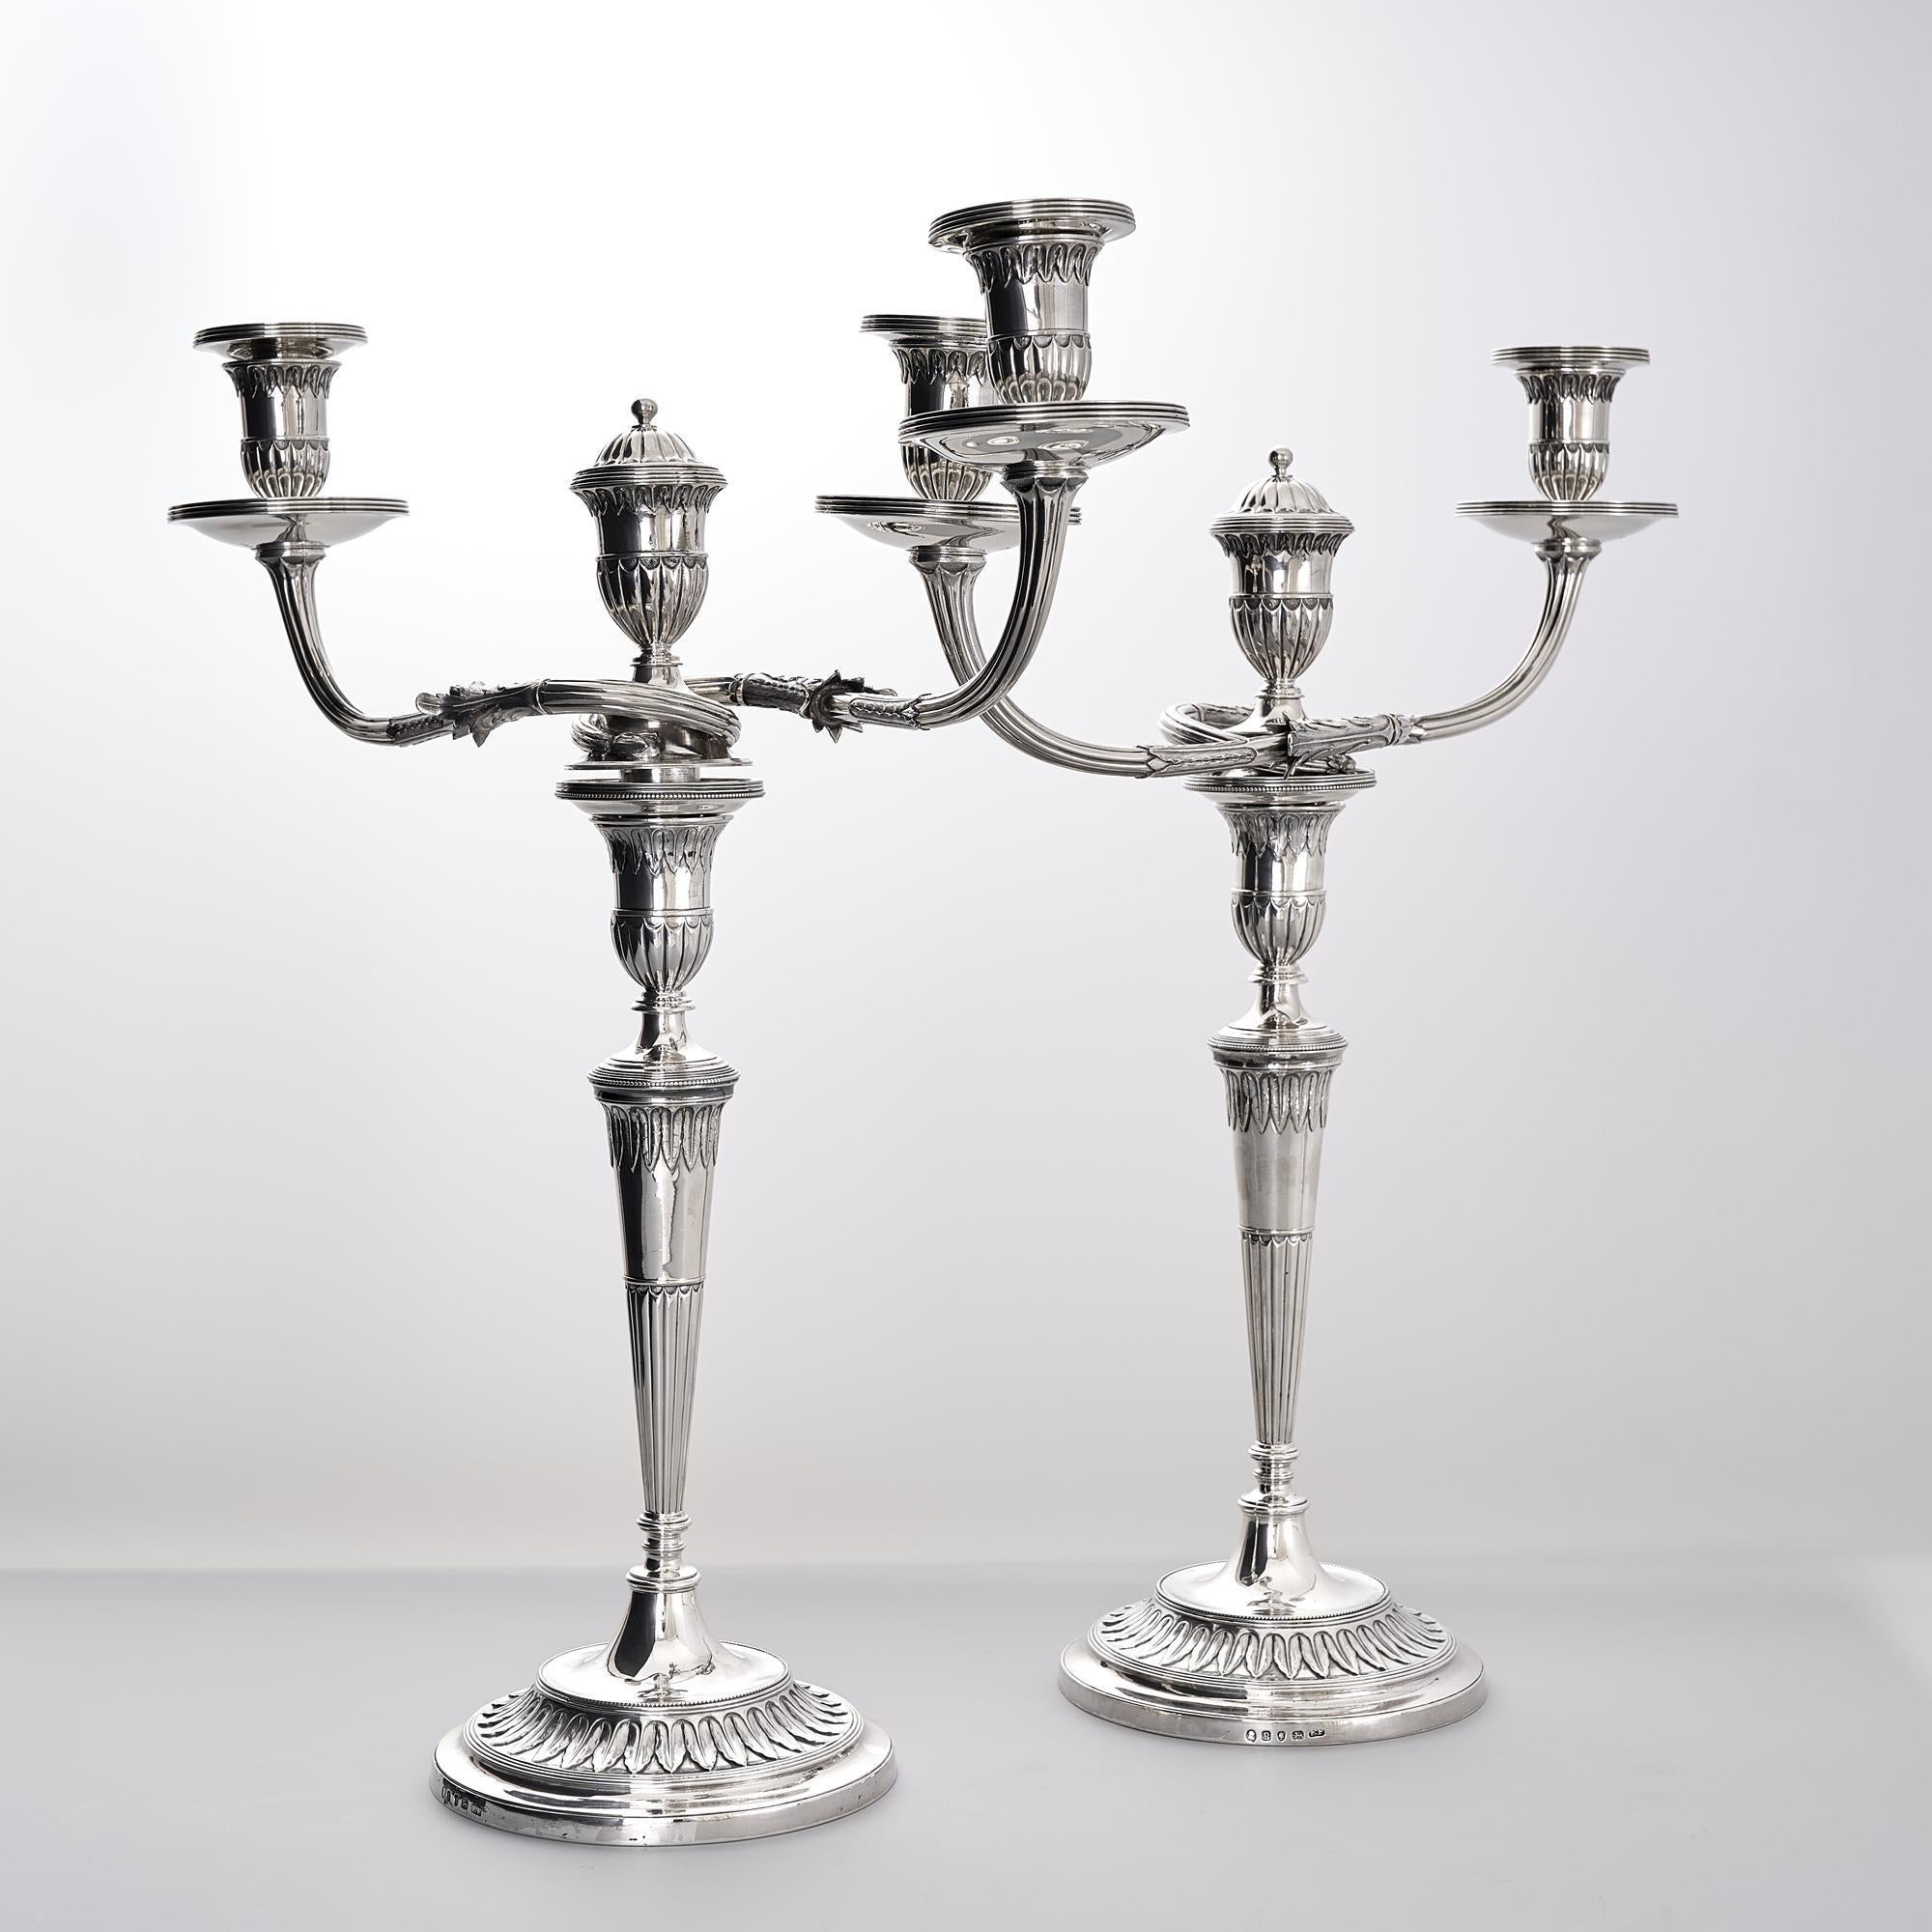 Late 18th Century George III silver candelabra suite